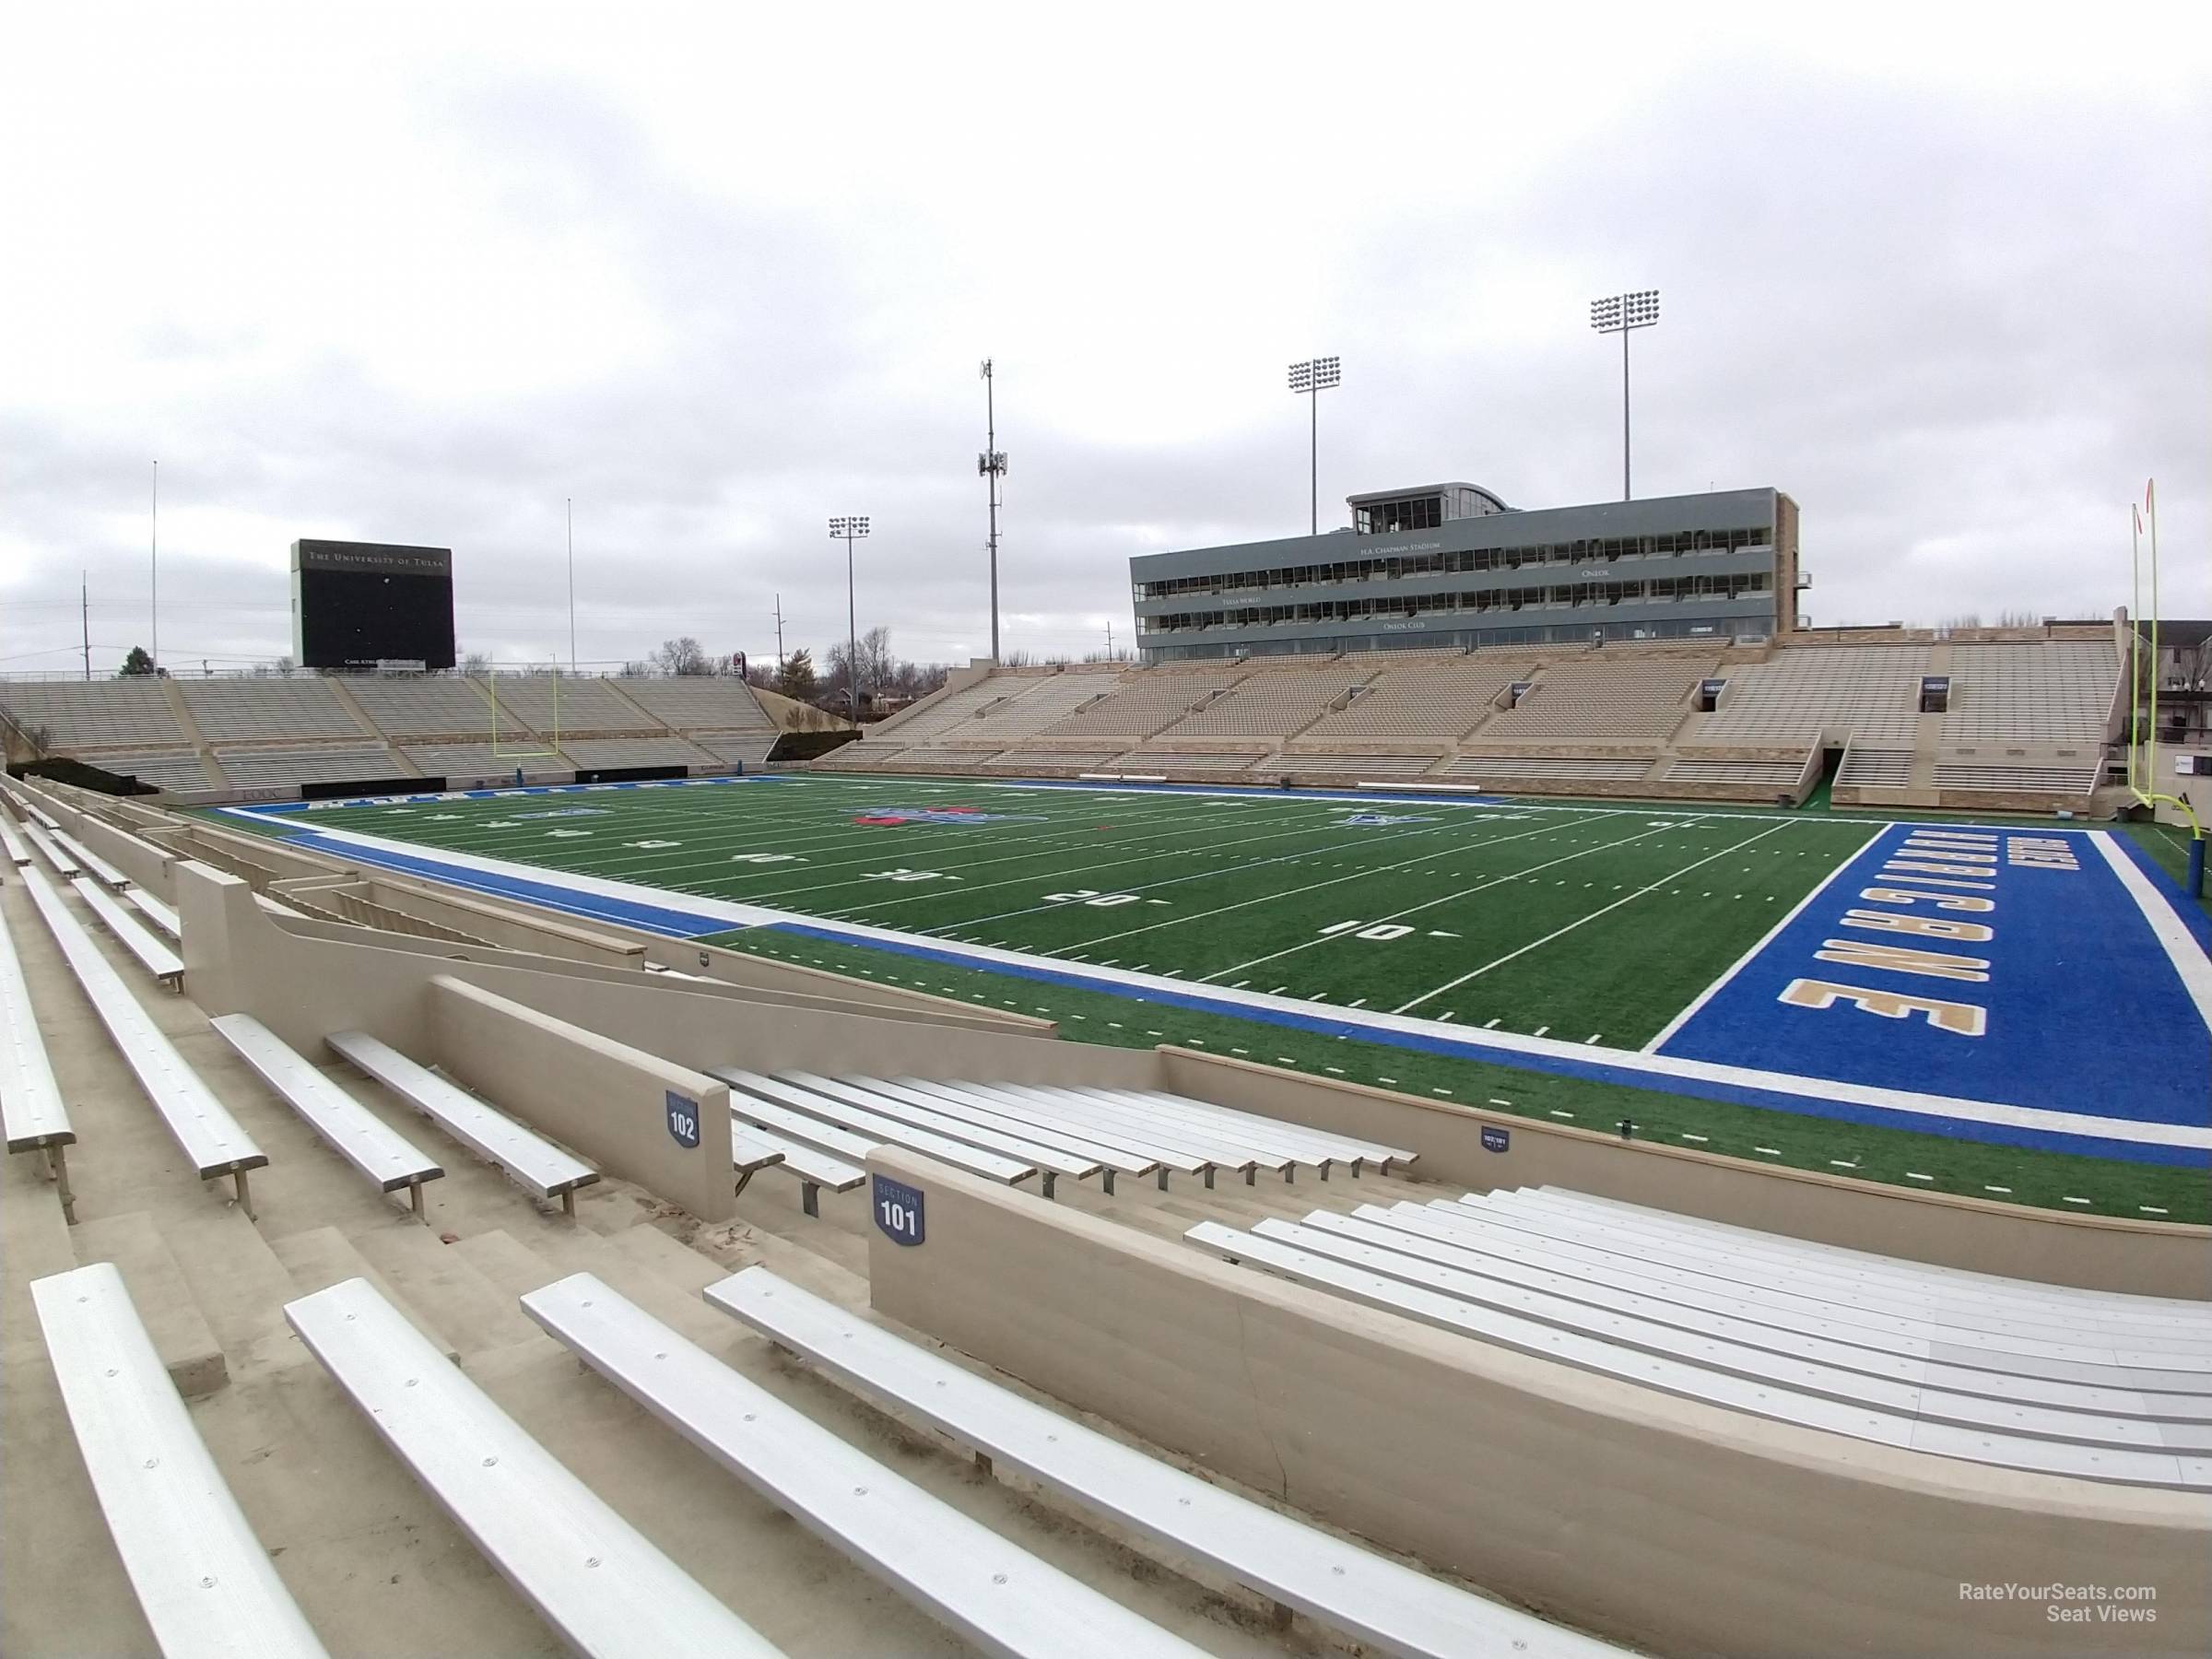 section 101, row 19 seat view  - h.a. chapman stadium